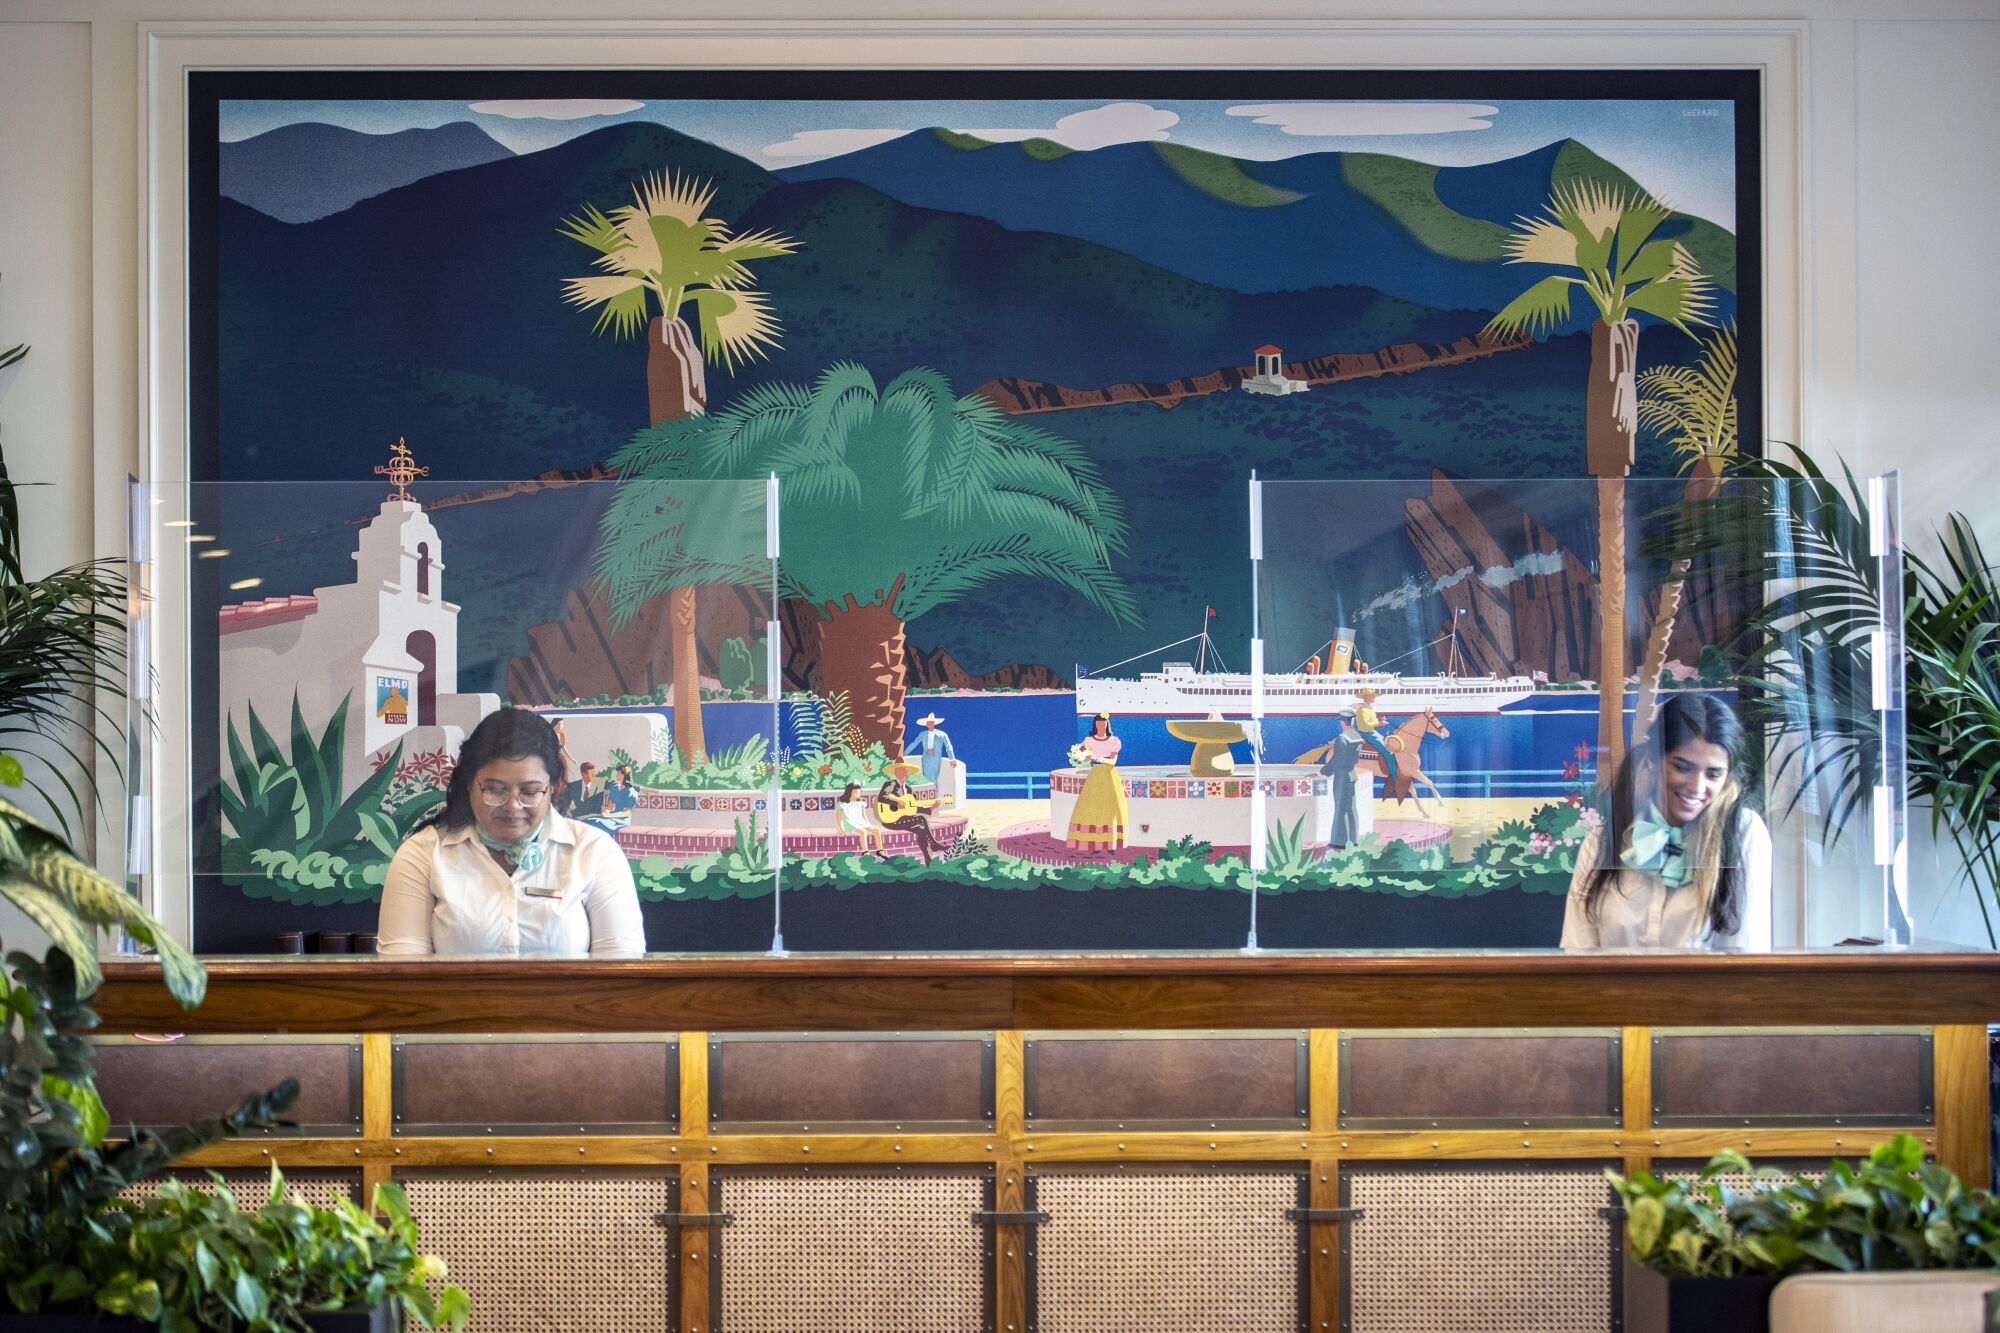 A hotel front counter backed by a mural of palm trees, ocean, a cruise ship and a Spanish Revival-style building